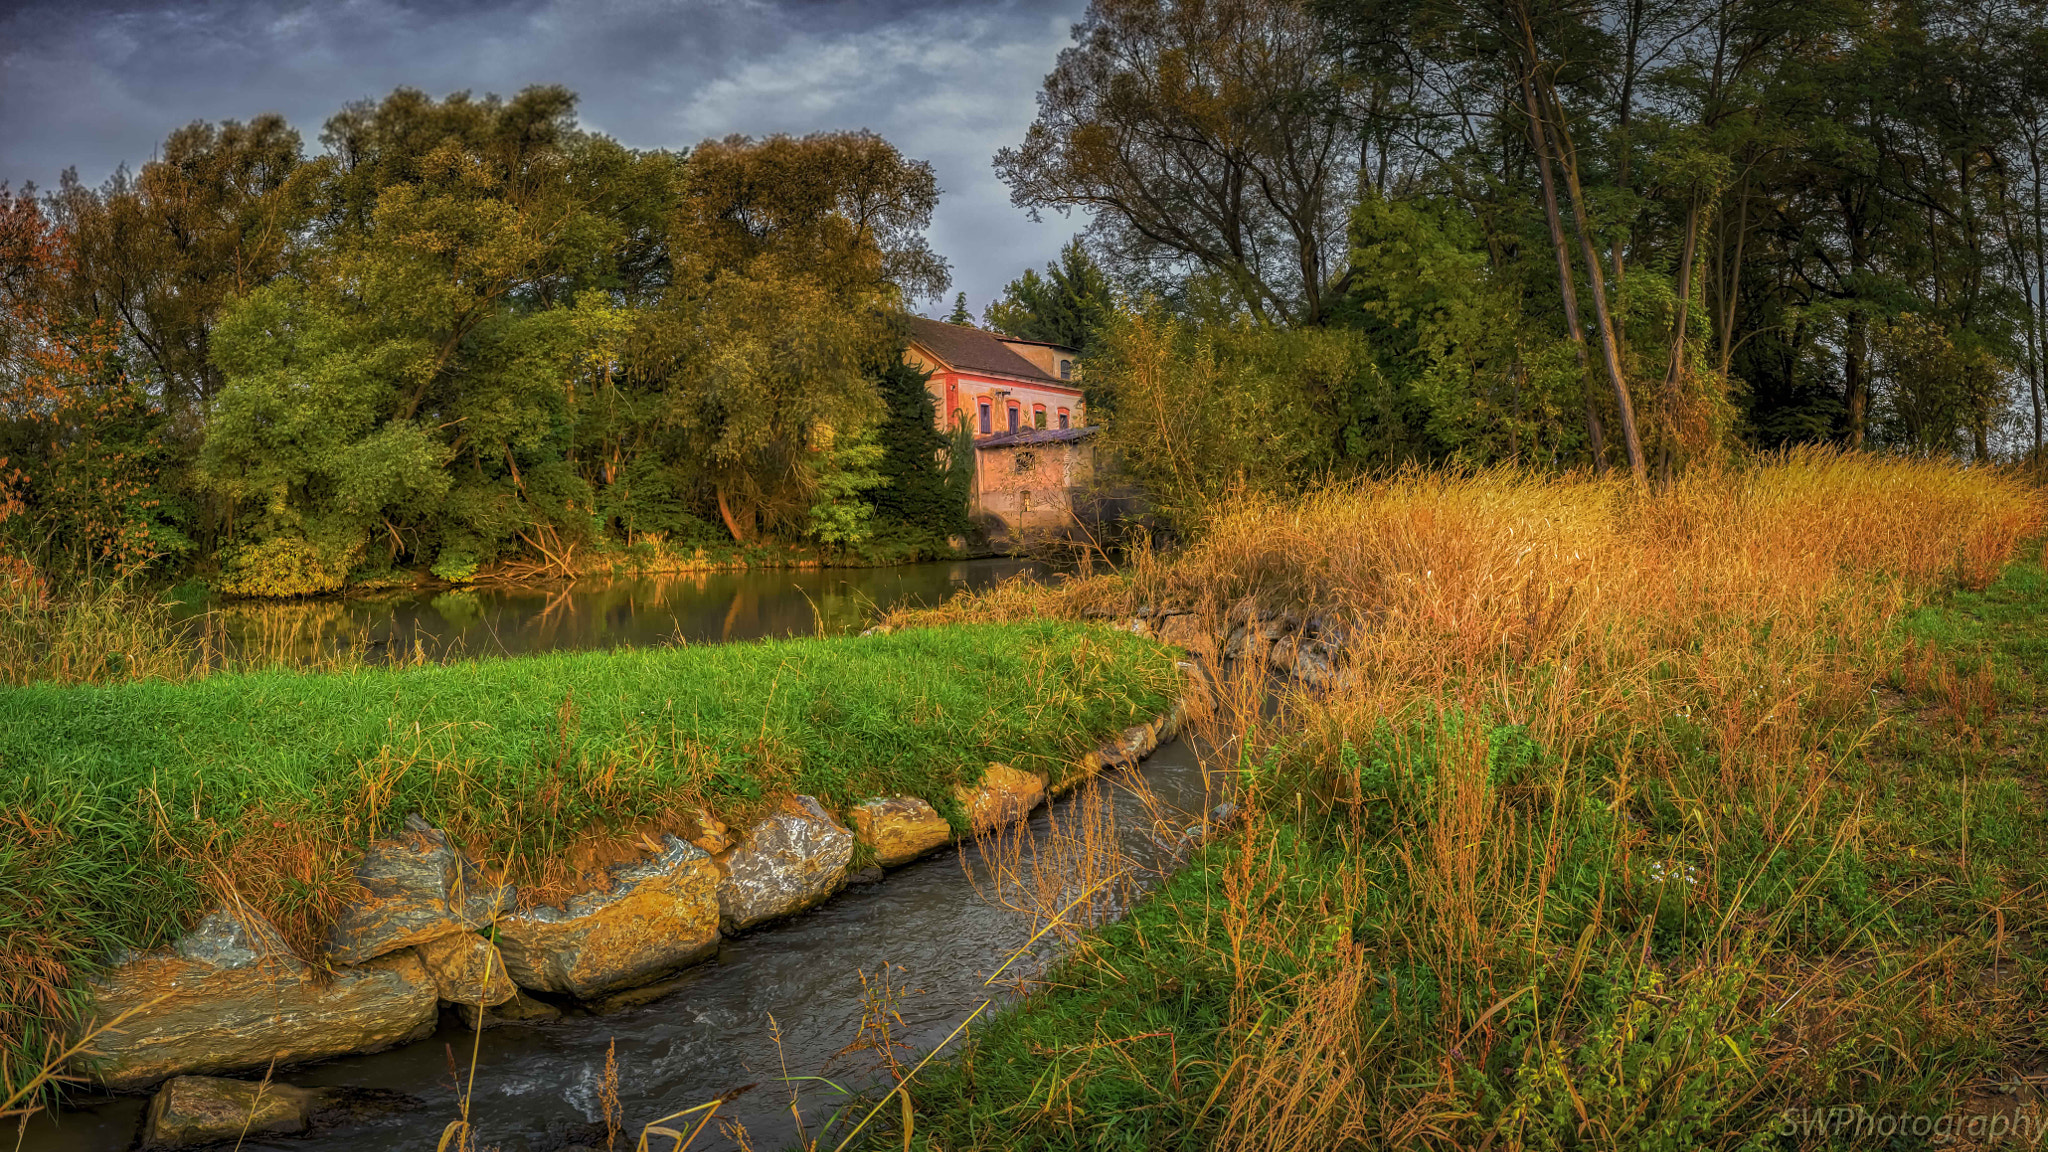 Sony a7 II + Sigma 24mm F1.4 DG HSM Art sample photo. The old mill house photography